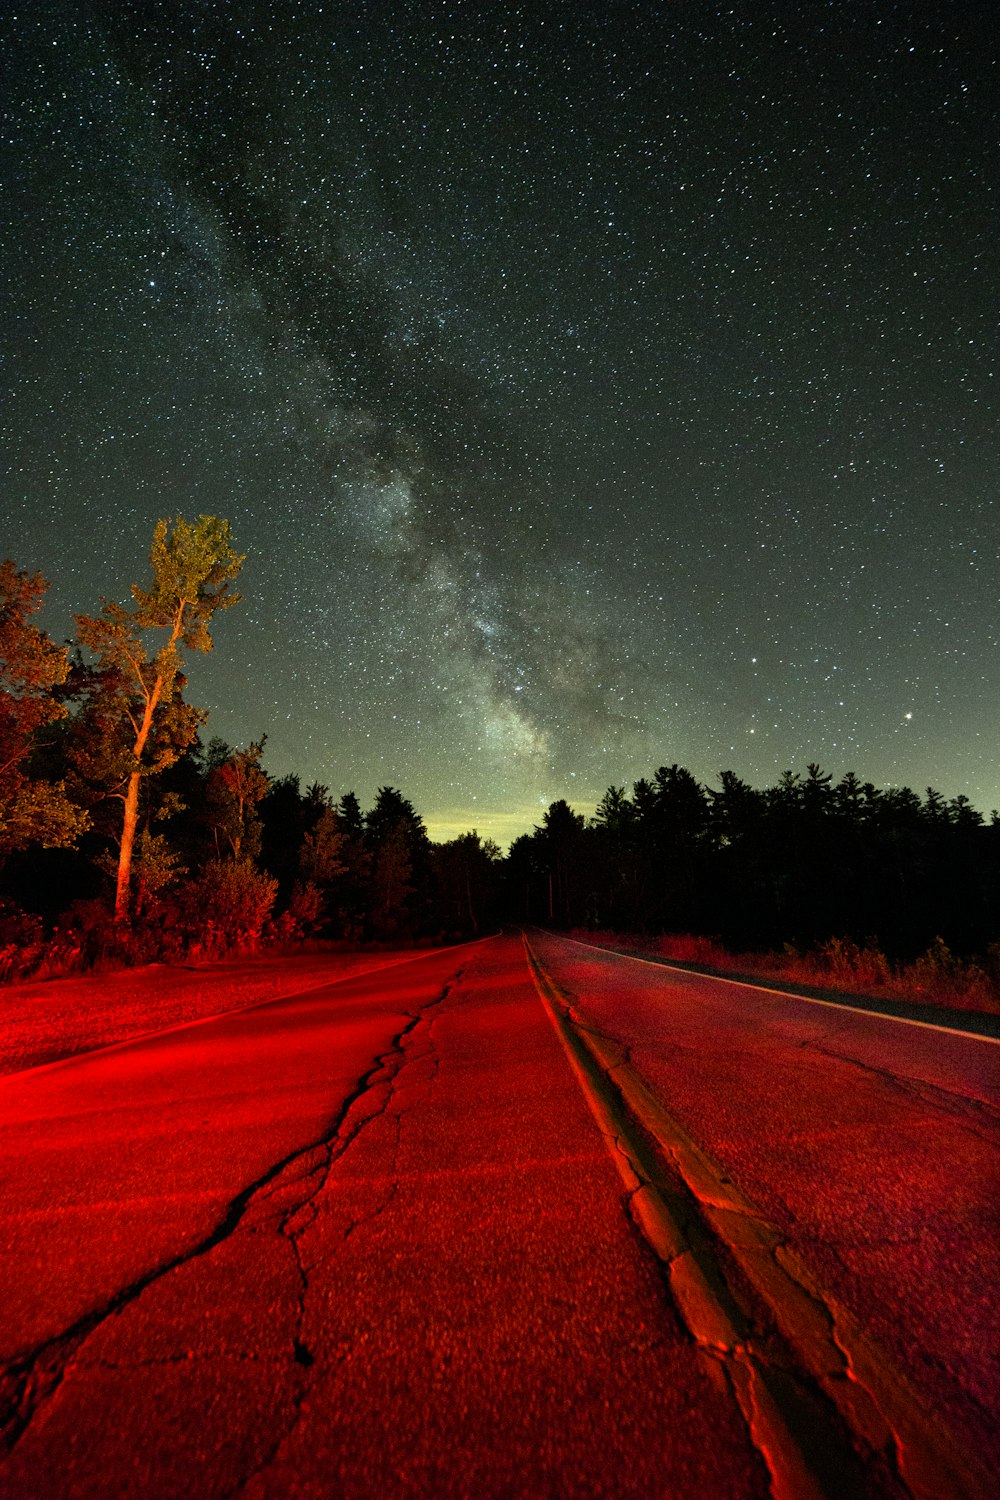 grey concrete straight road near tall trees under white stars at nighttime